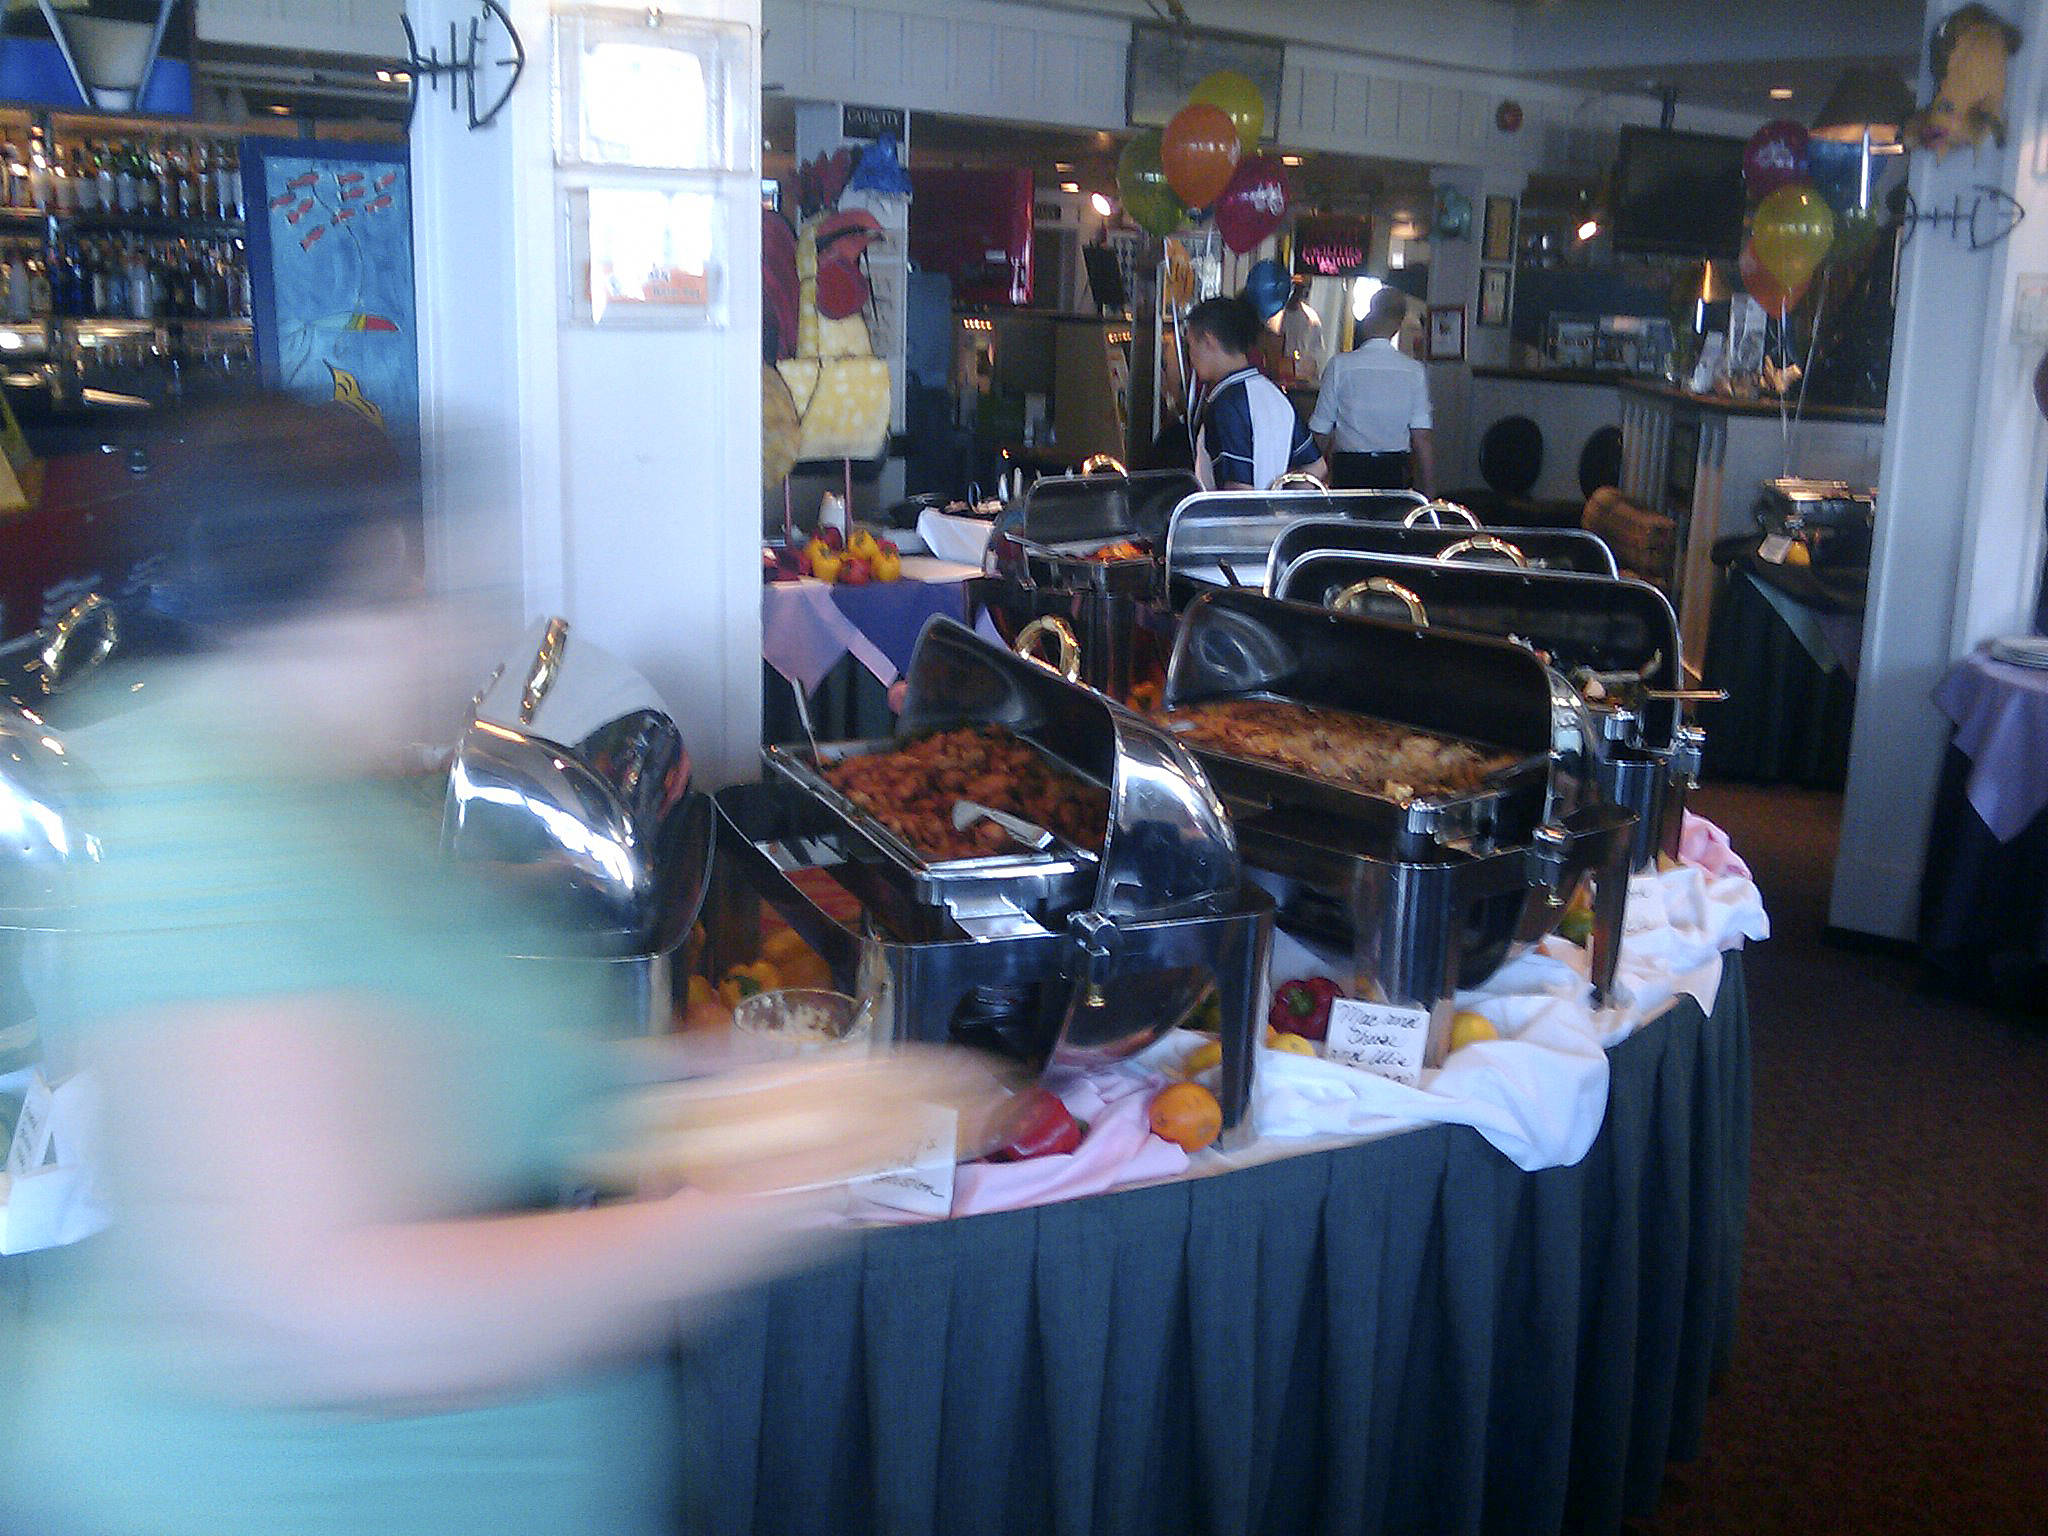 Salty’s brunch buffet. Photo by Mike Prosser/Flickr